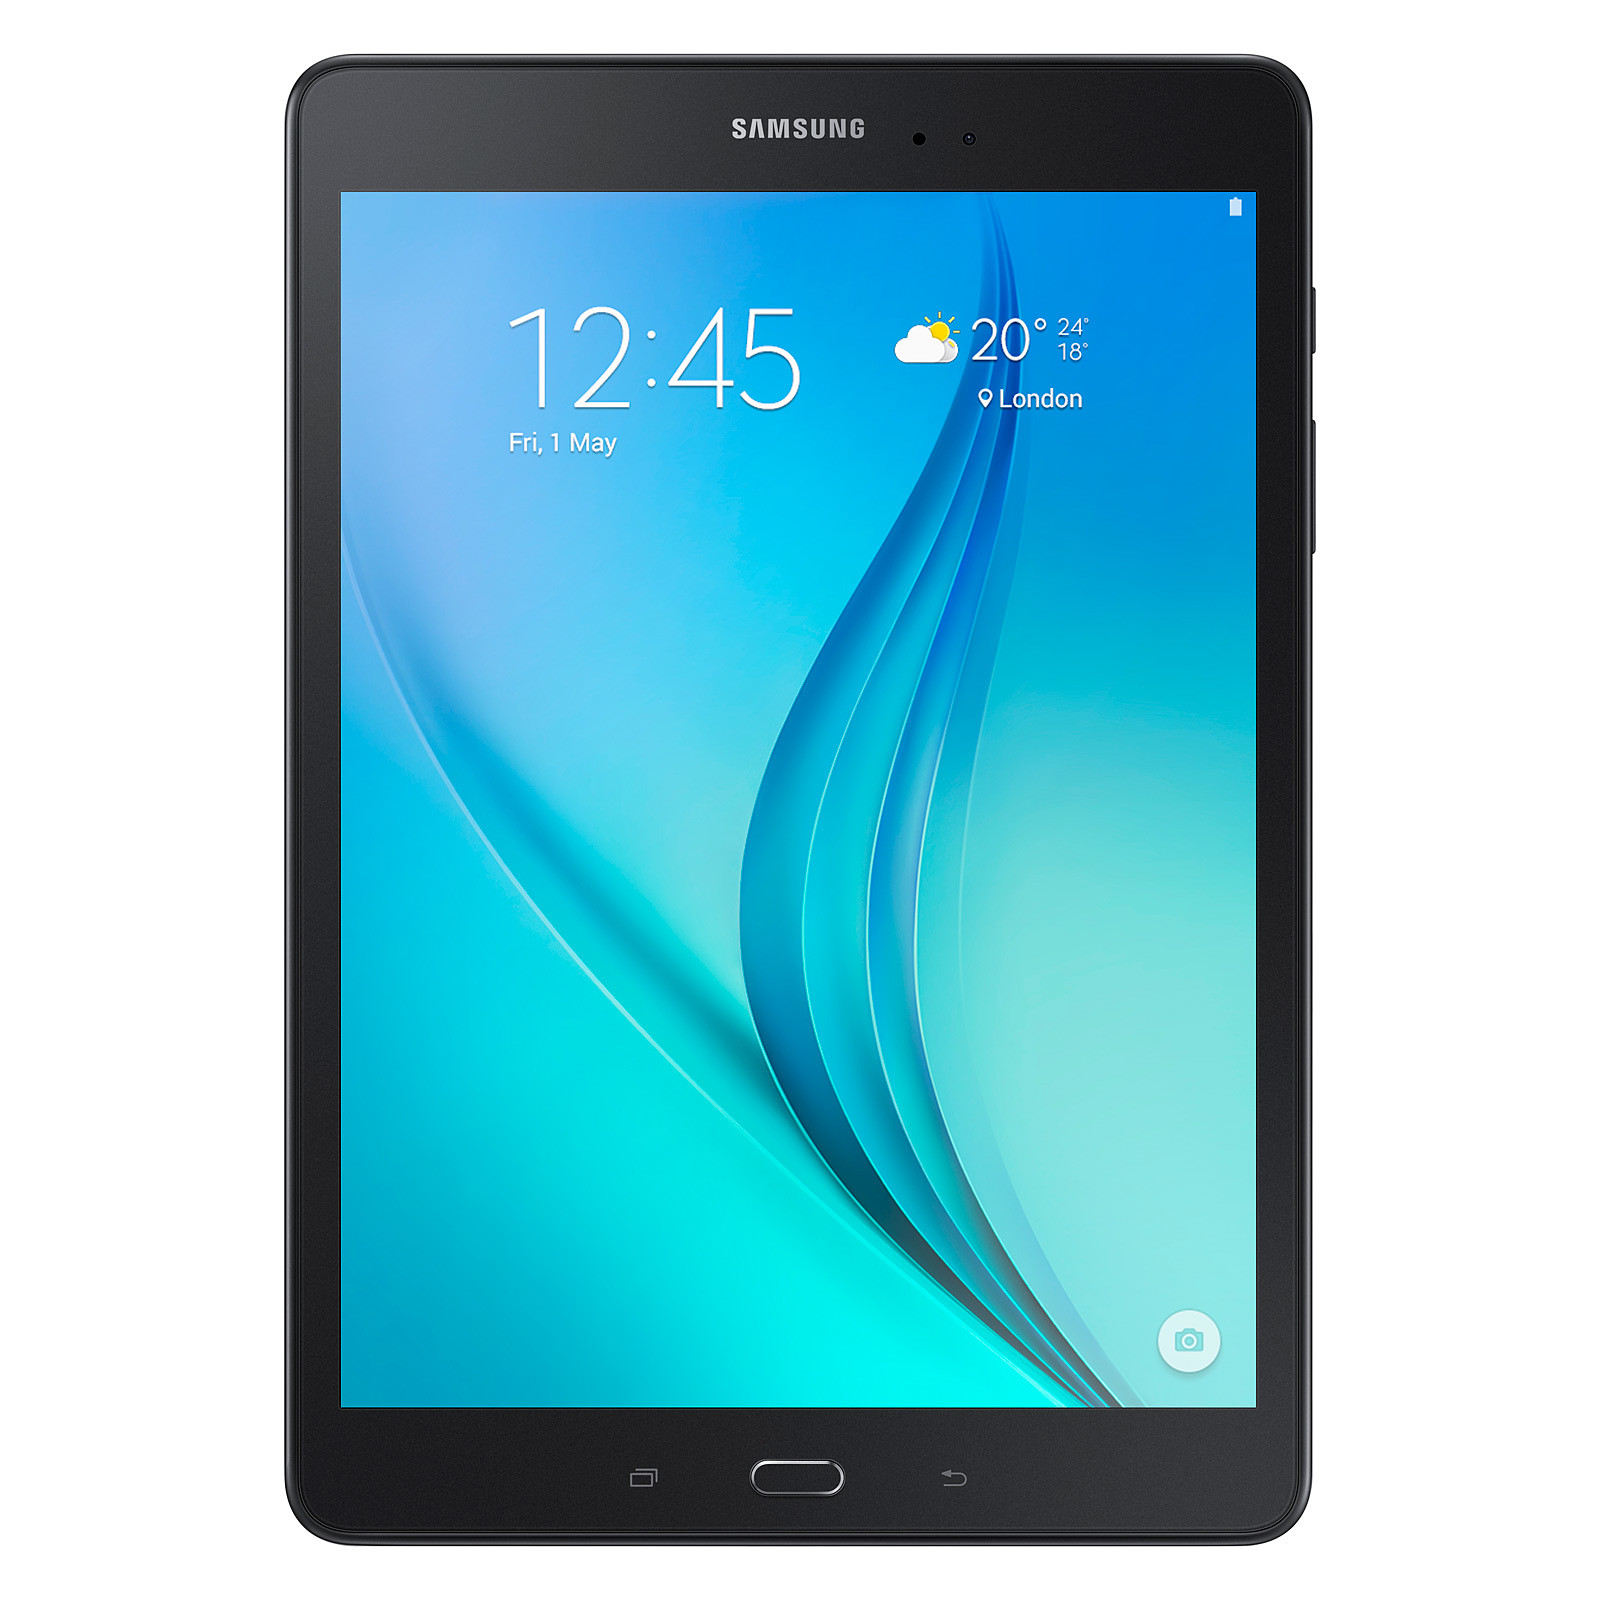 Samsung Galaxy Tab A 9.7" SM-T550 16 Go Noire · Reconditionne - Tablette tactile Samsung